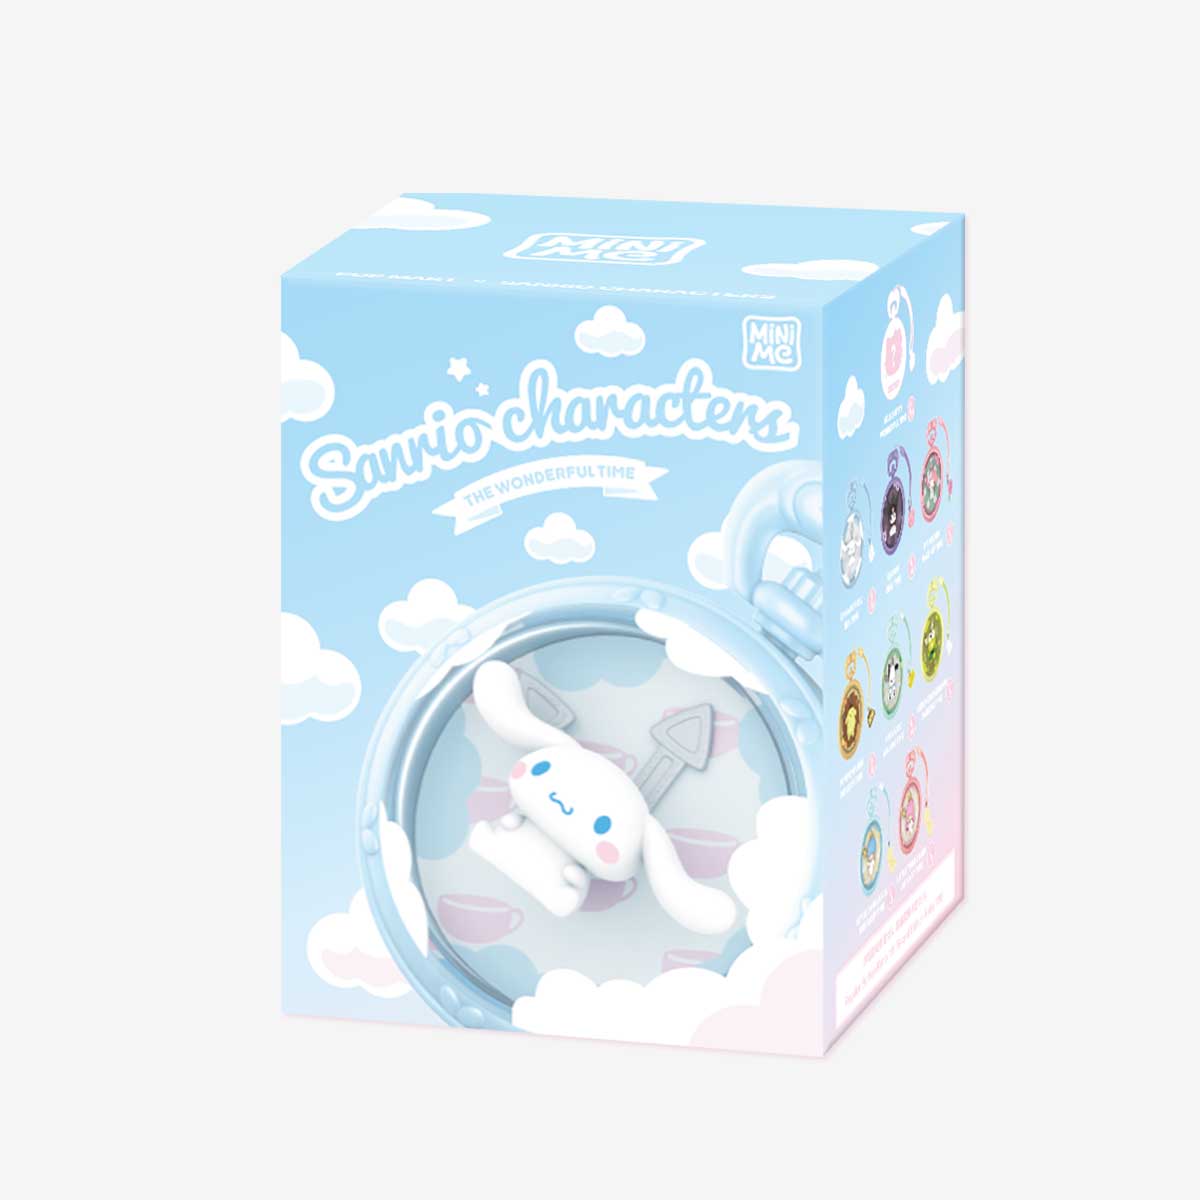 POP MART The Wonderful Time With Sanrio Characters Series Scene Sets-Single Box (Random)-Pop Mart-Ace Cards &amp; Collectibles